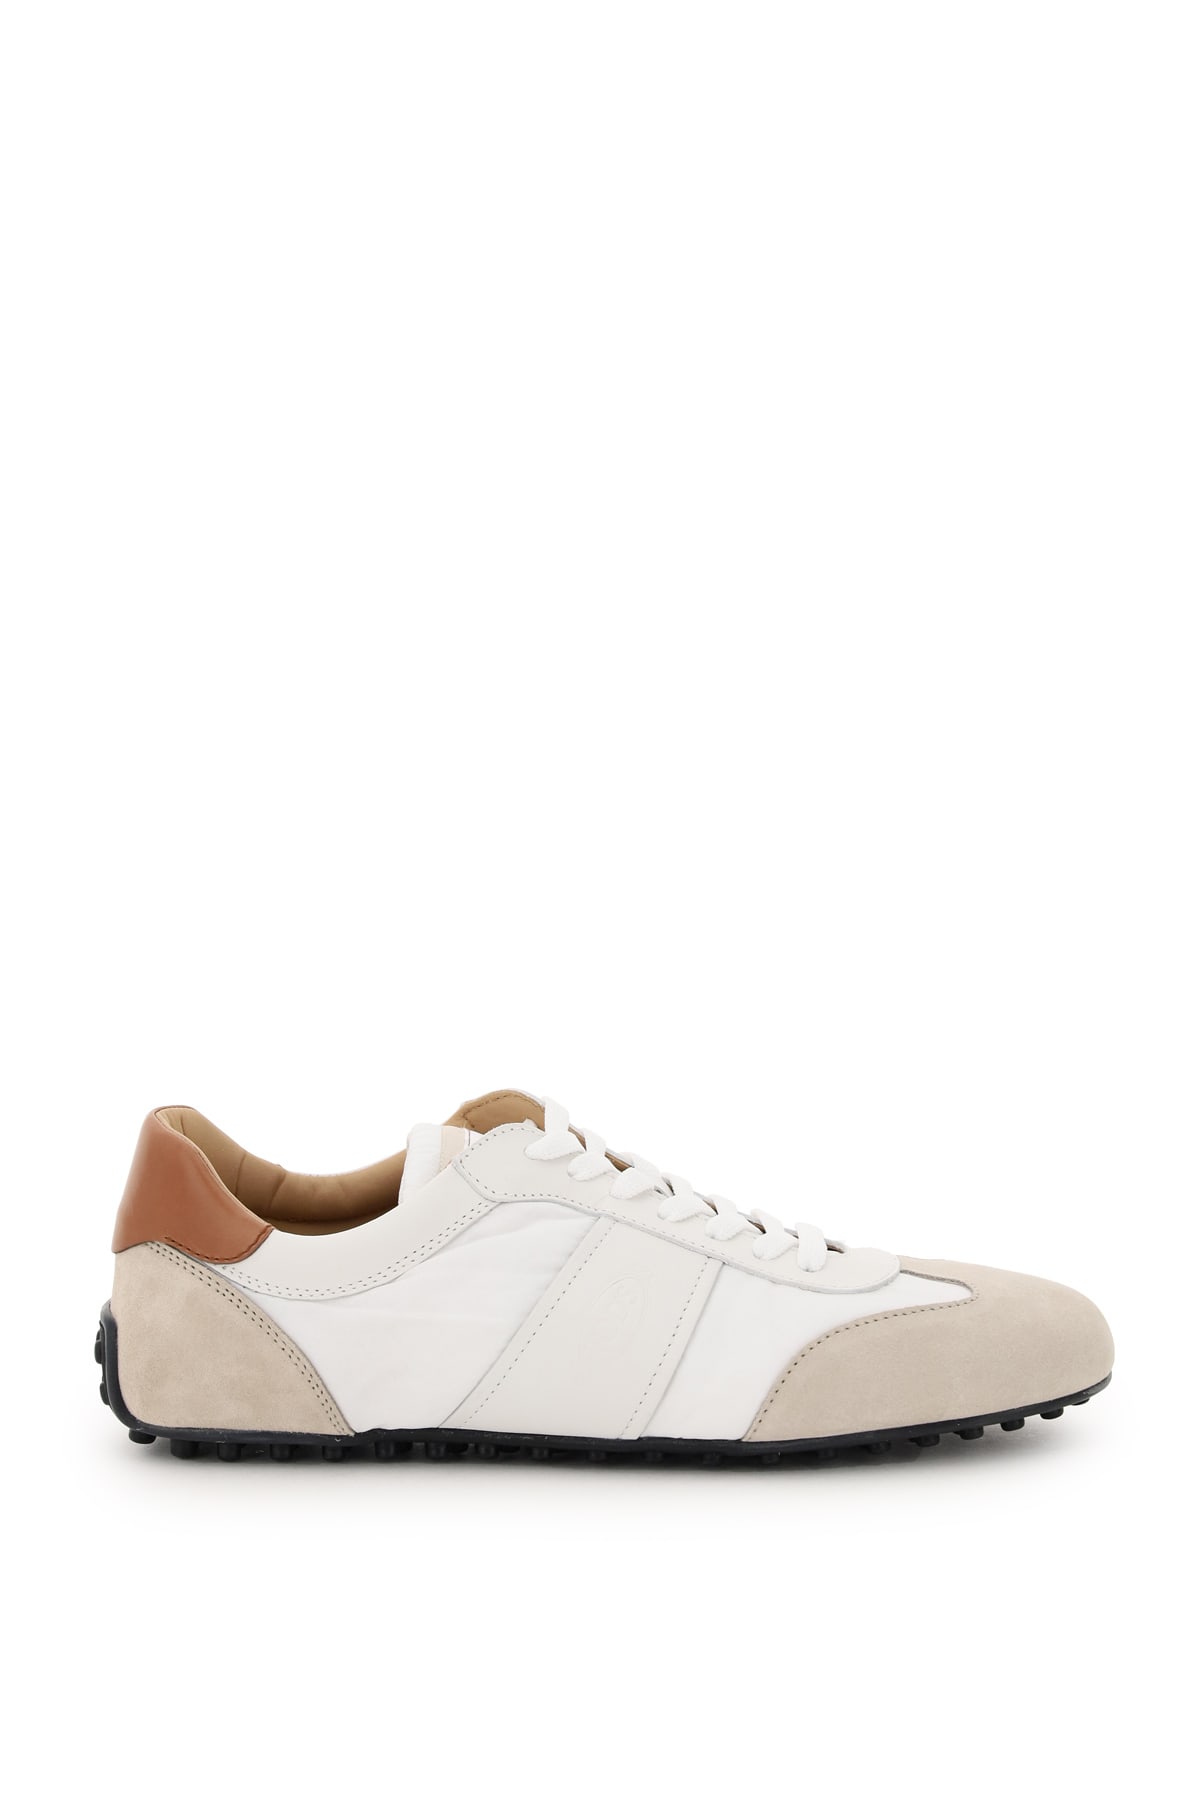 Tods Leather And Fabric Sneakers